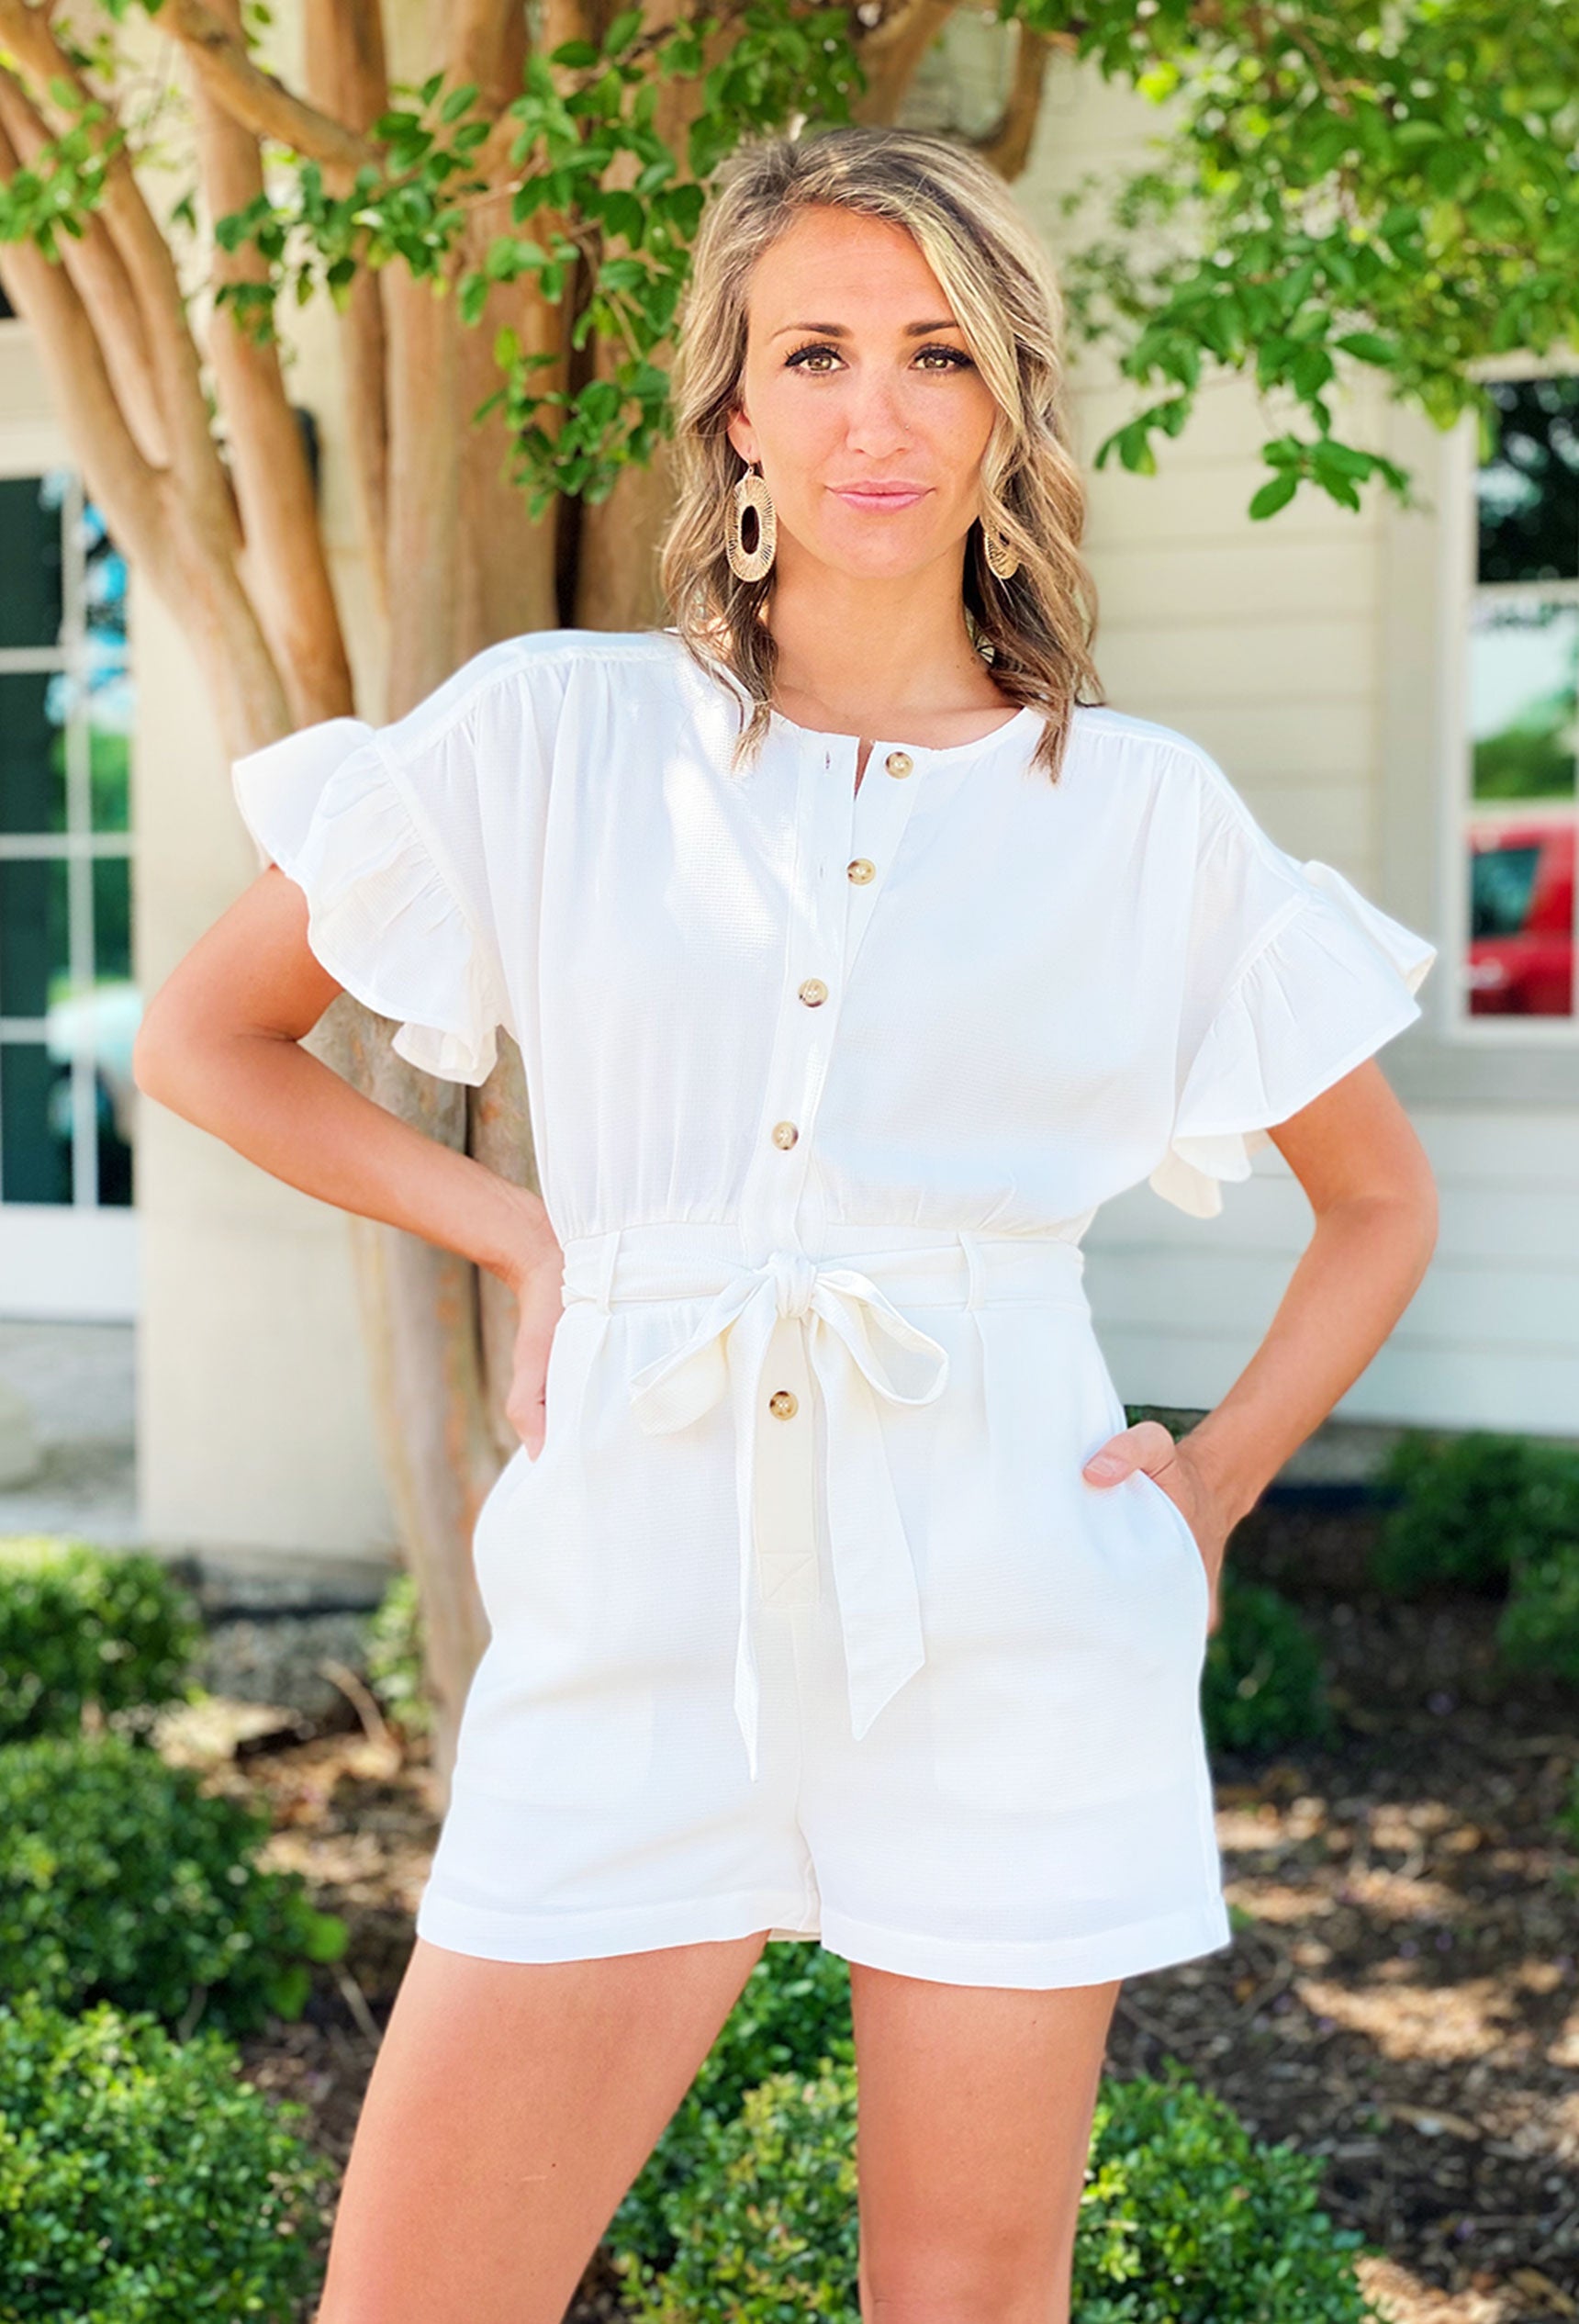 The Coast Is Calling Romper. Soft white fabric with a subtle texture, White romper with tortoise shell buttons and a matching belt.